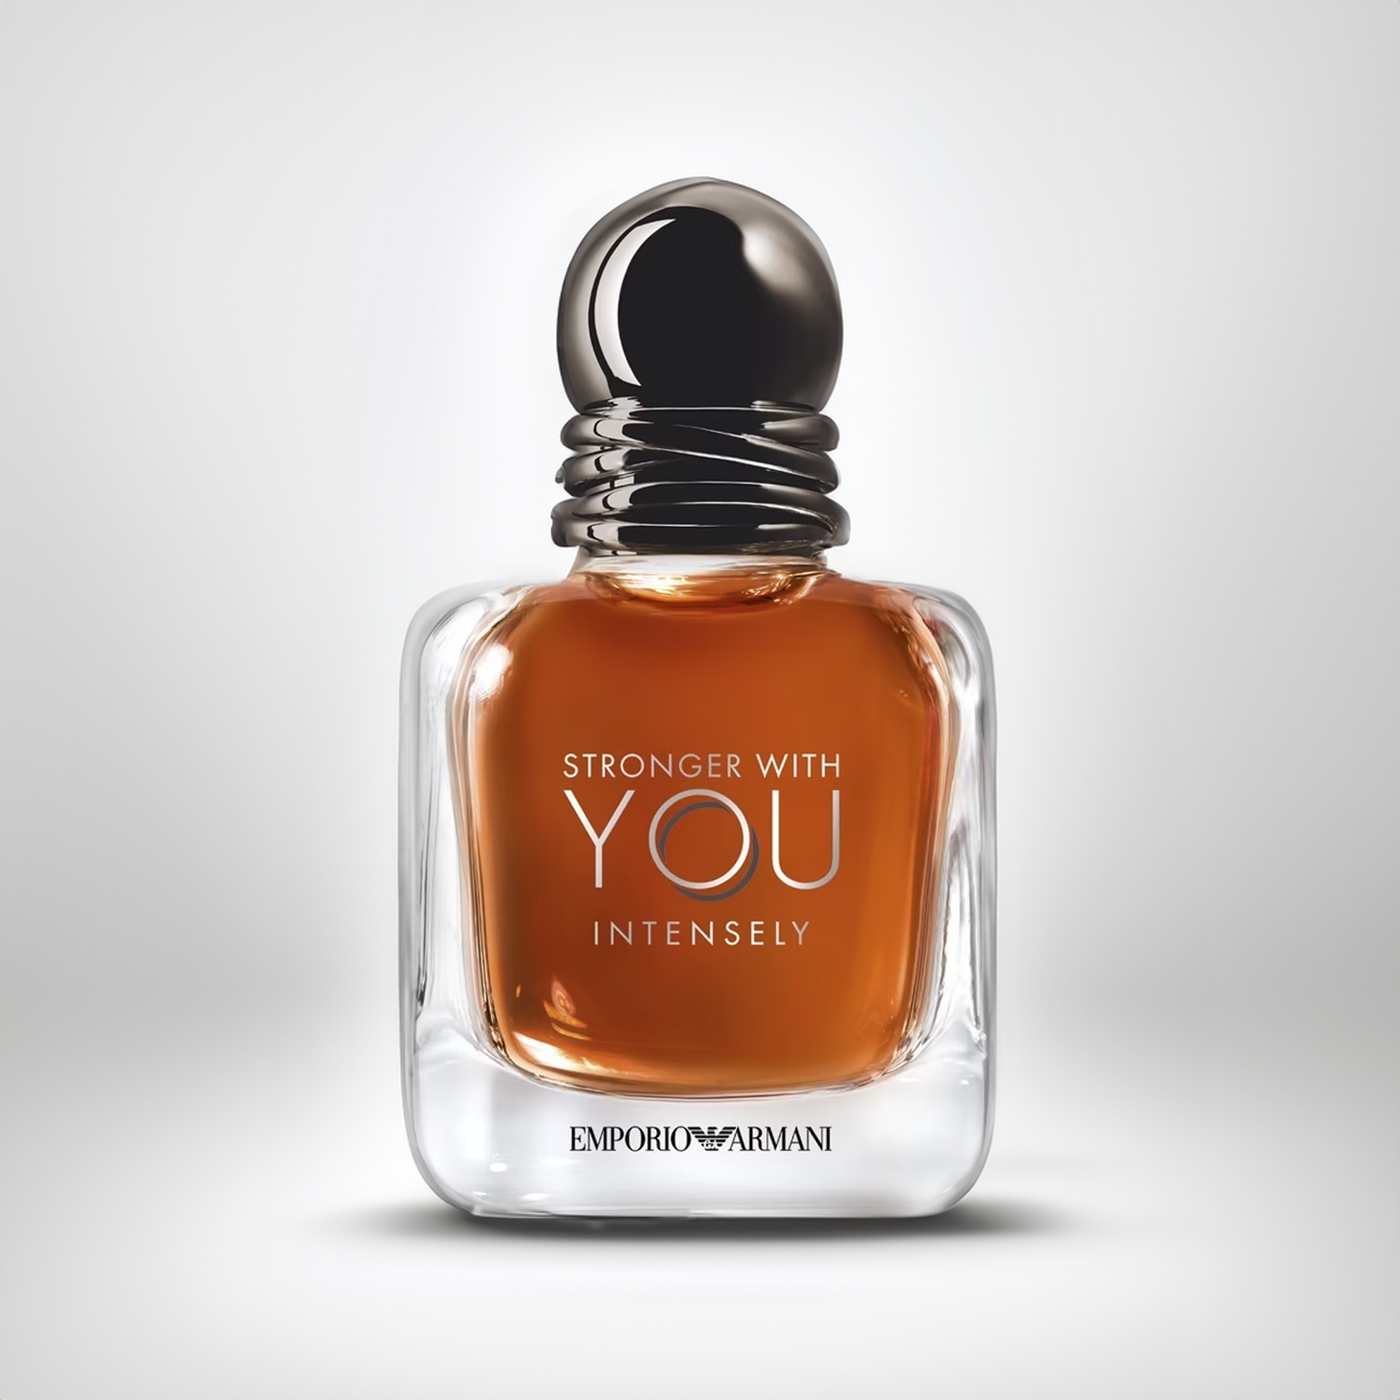 Emporio Armani - Stronger With You Intensly